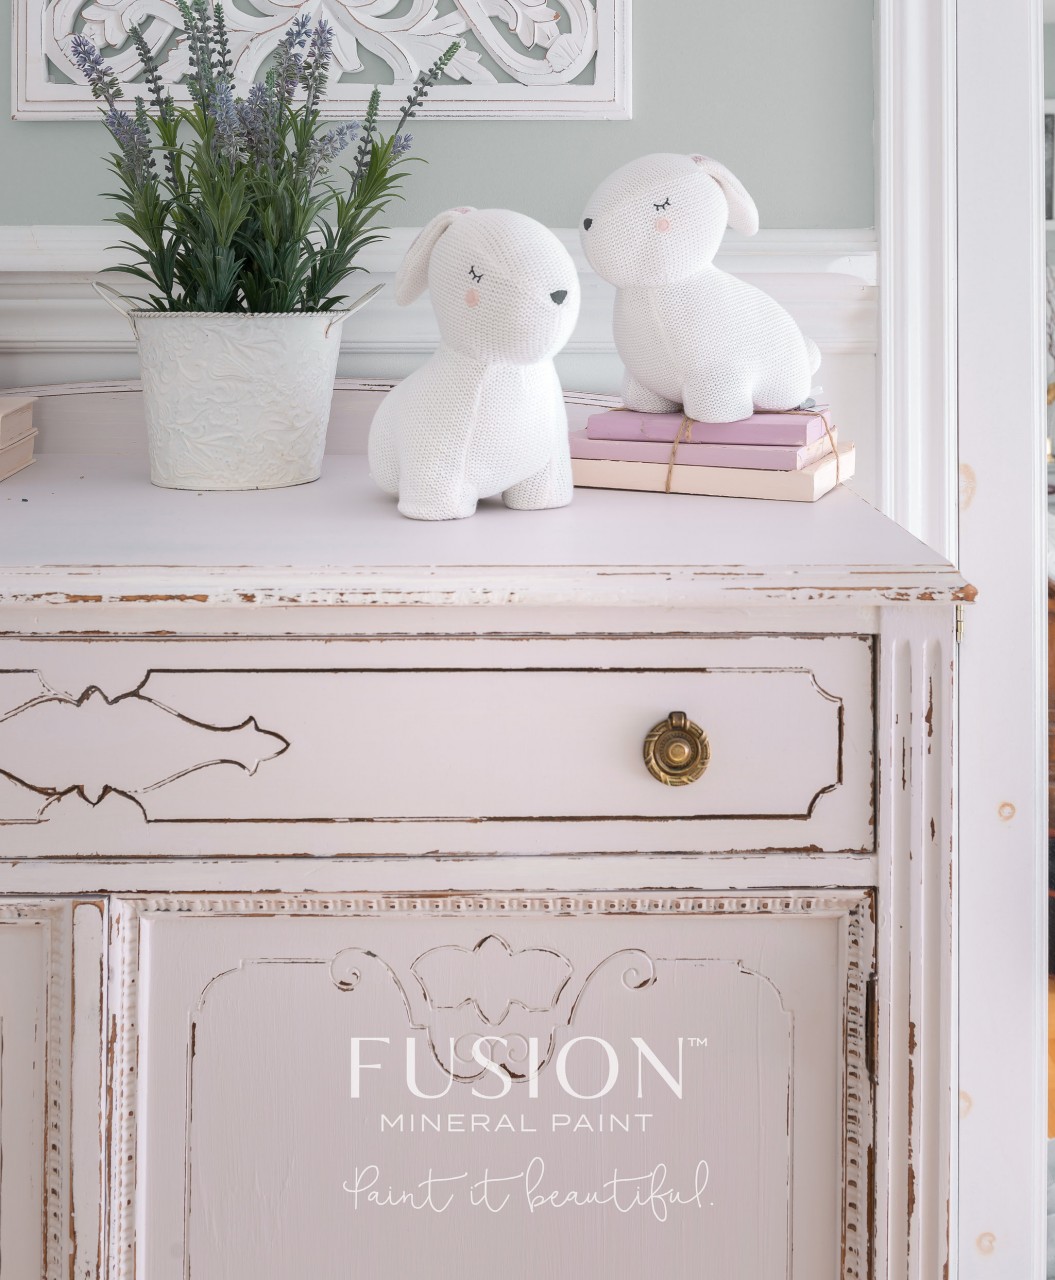 Nursery Inspiration Paint Colours Soft and sophisticated nursery colours with a matte smooth paint finish . Little Stork Soft Lilac Purple Fusion Mineral Paint | www.Fusionmineralpaint.com